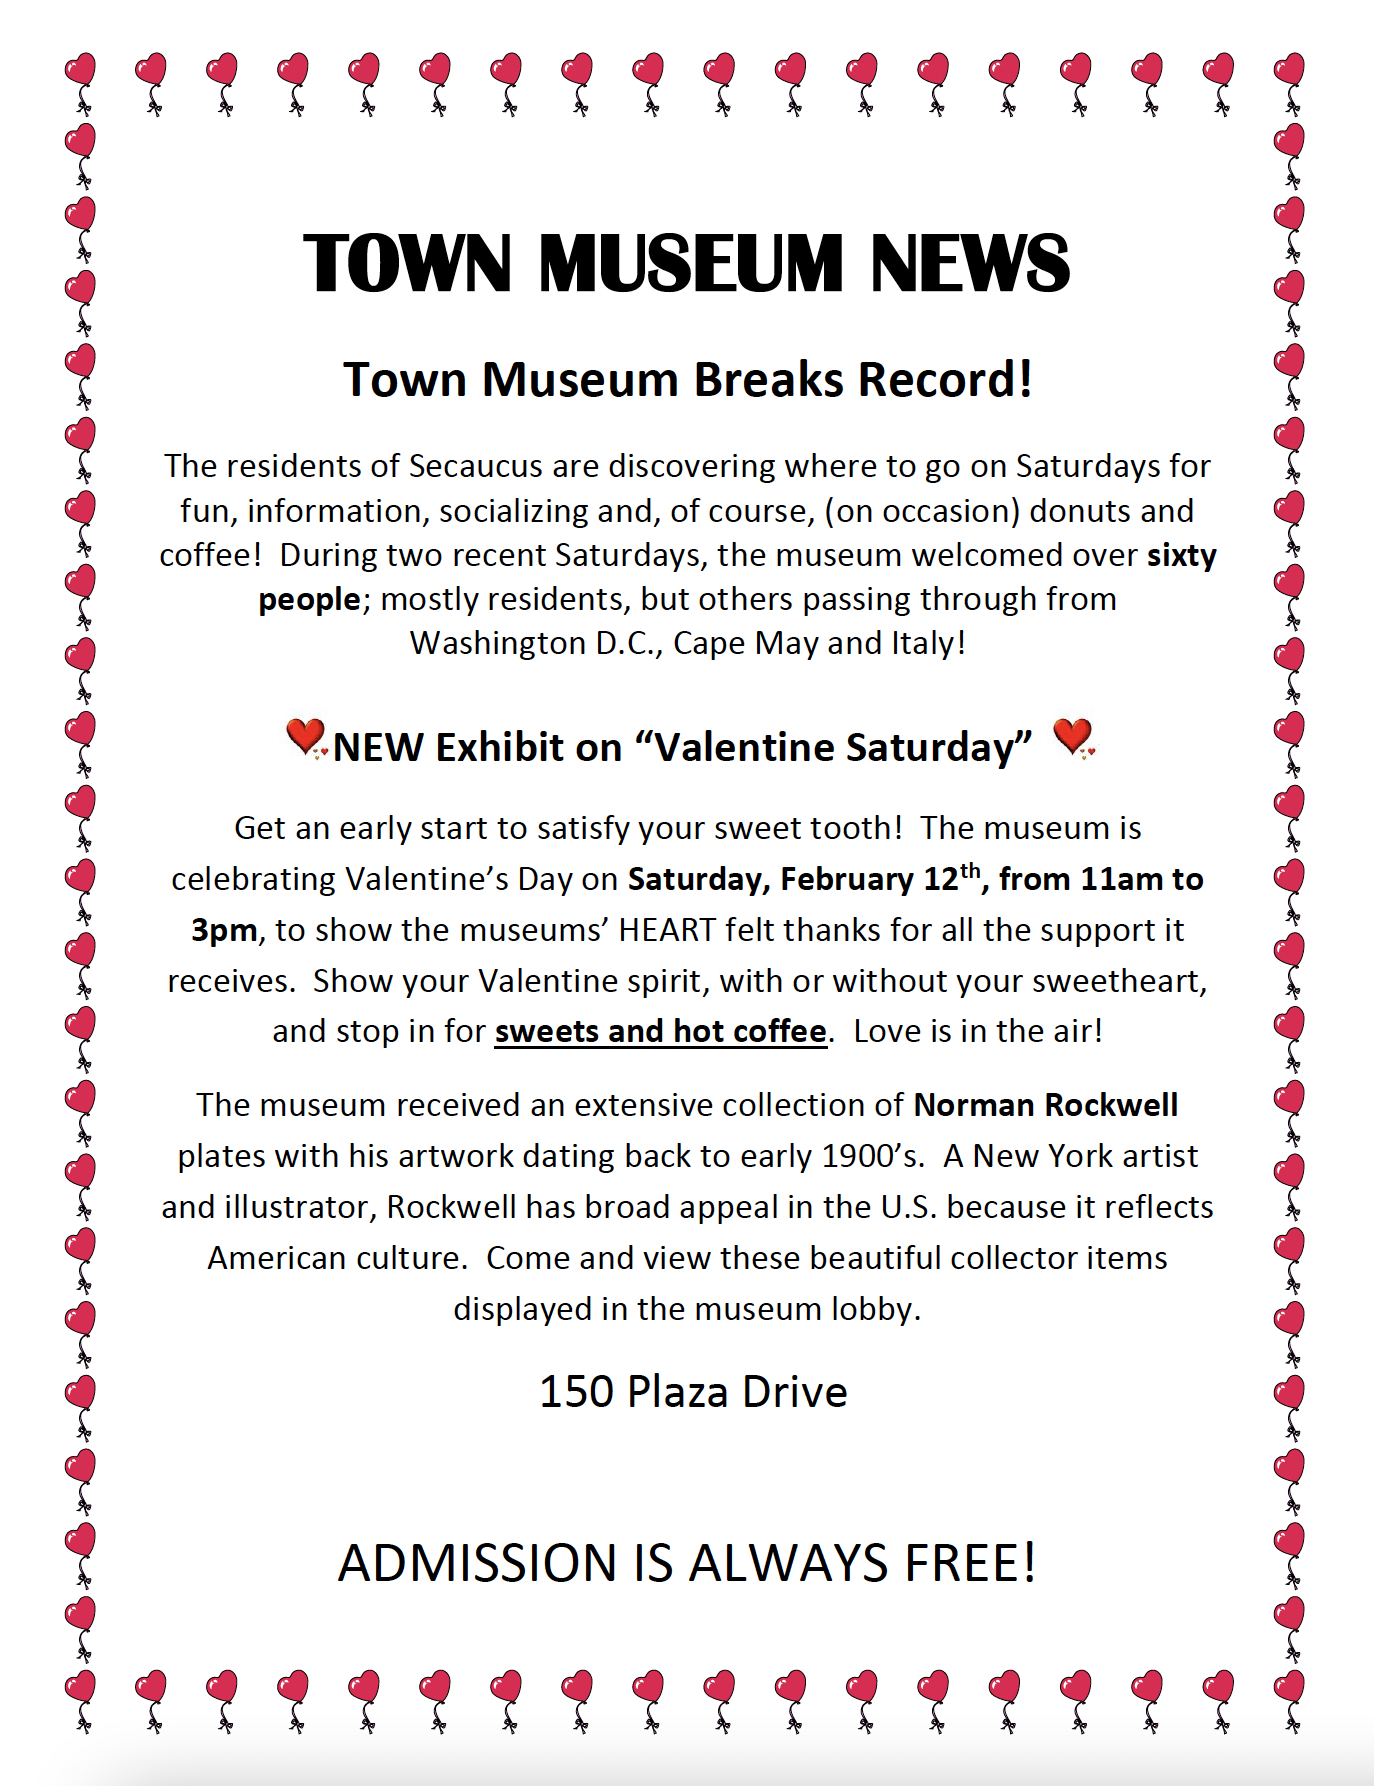 valentines day party at town museum flyer